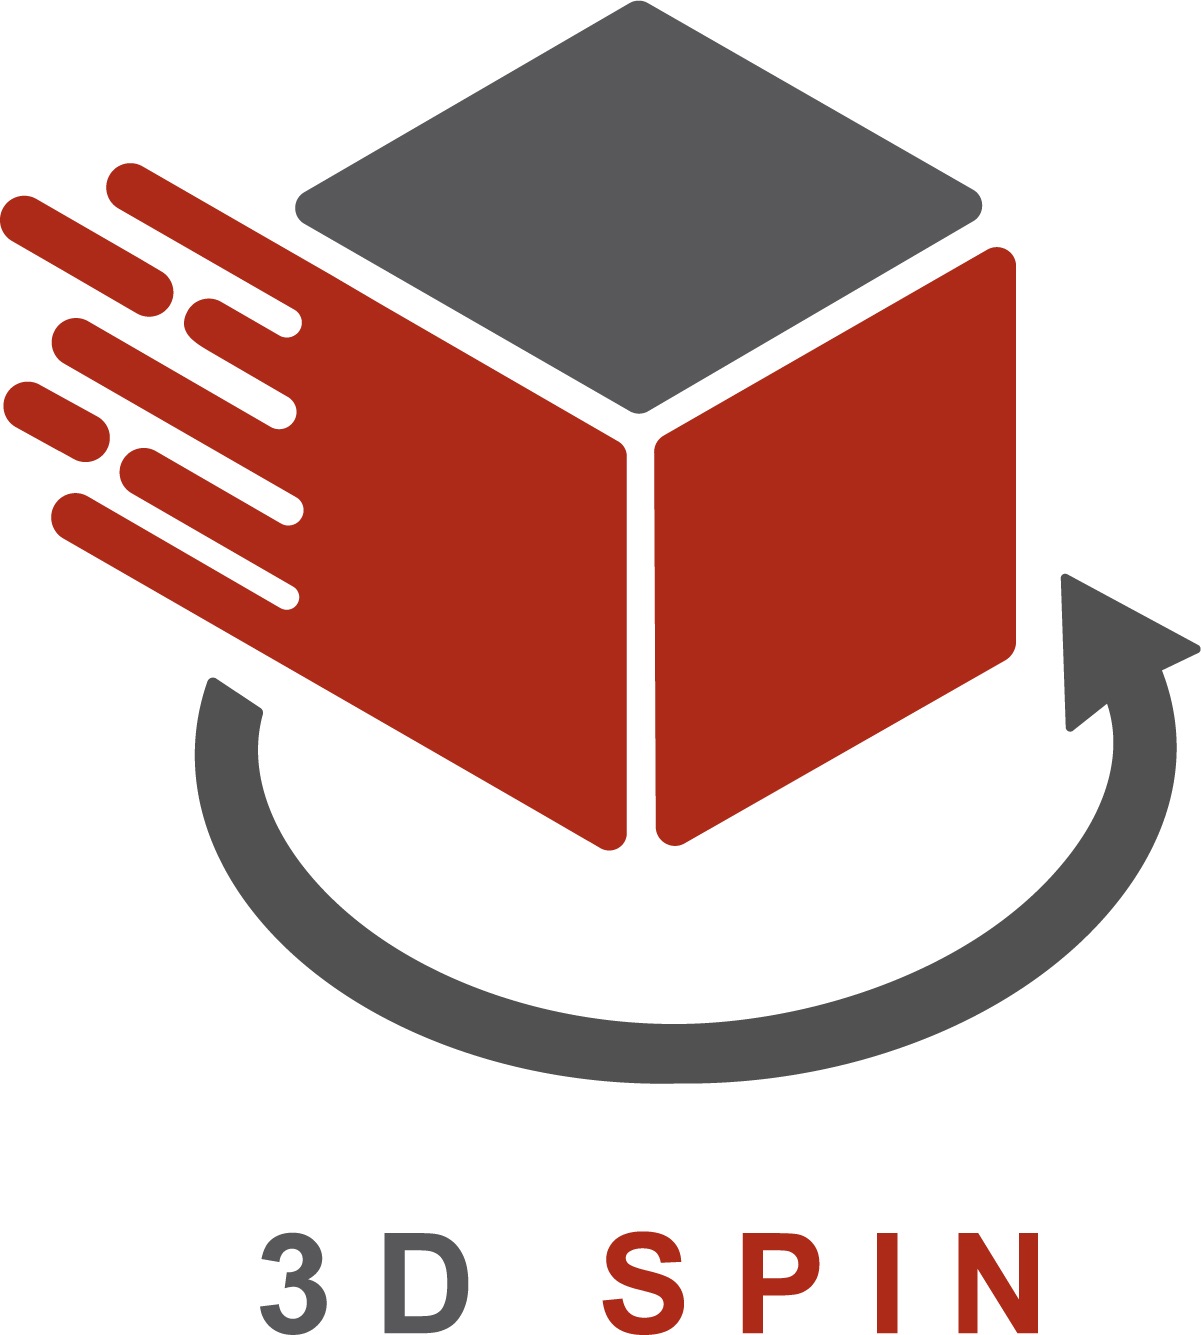 3DSPIN